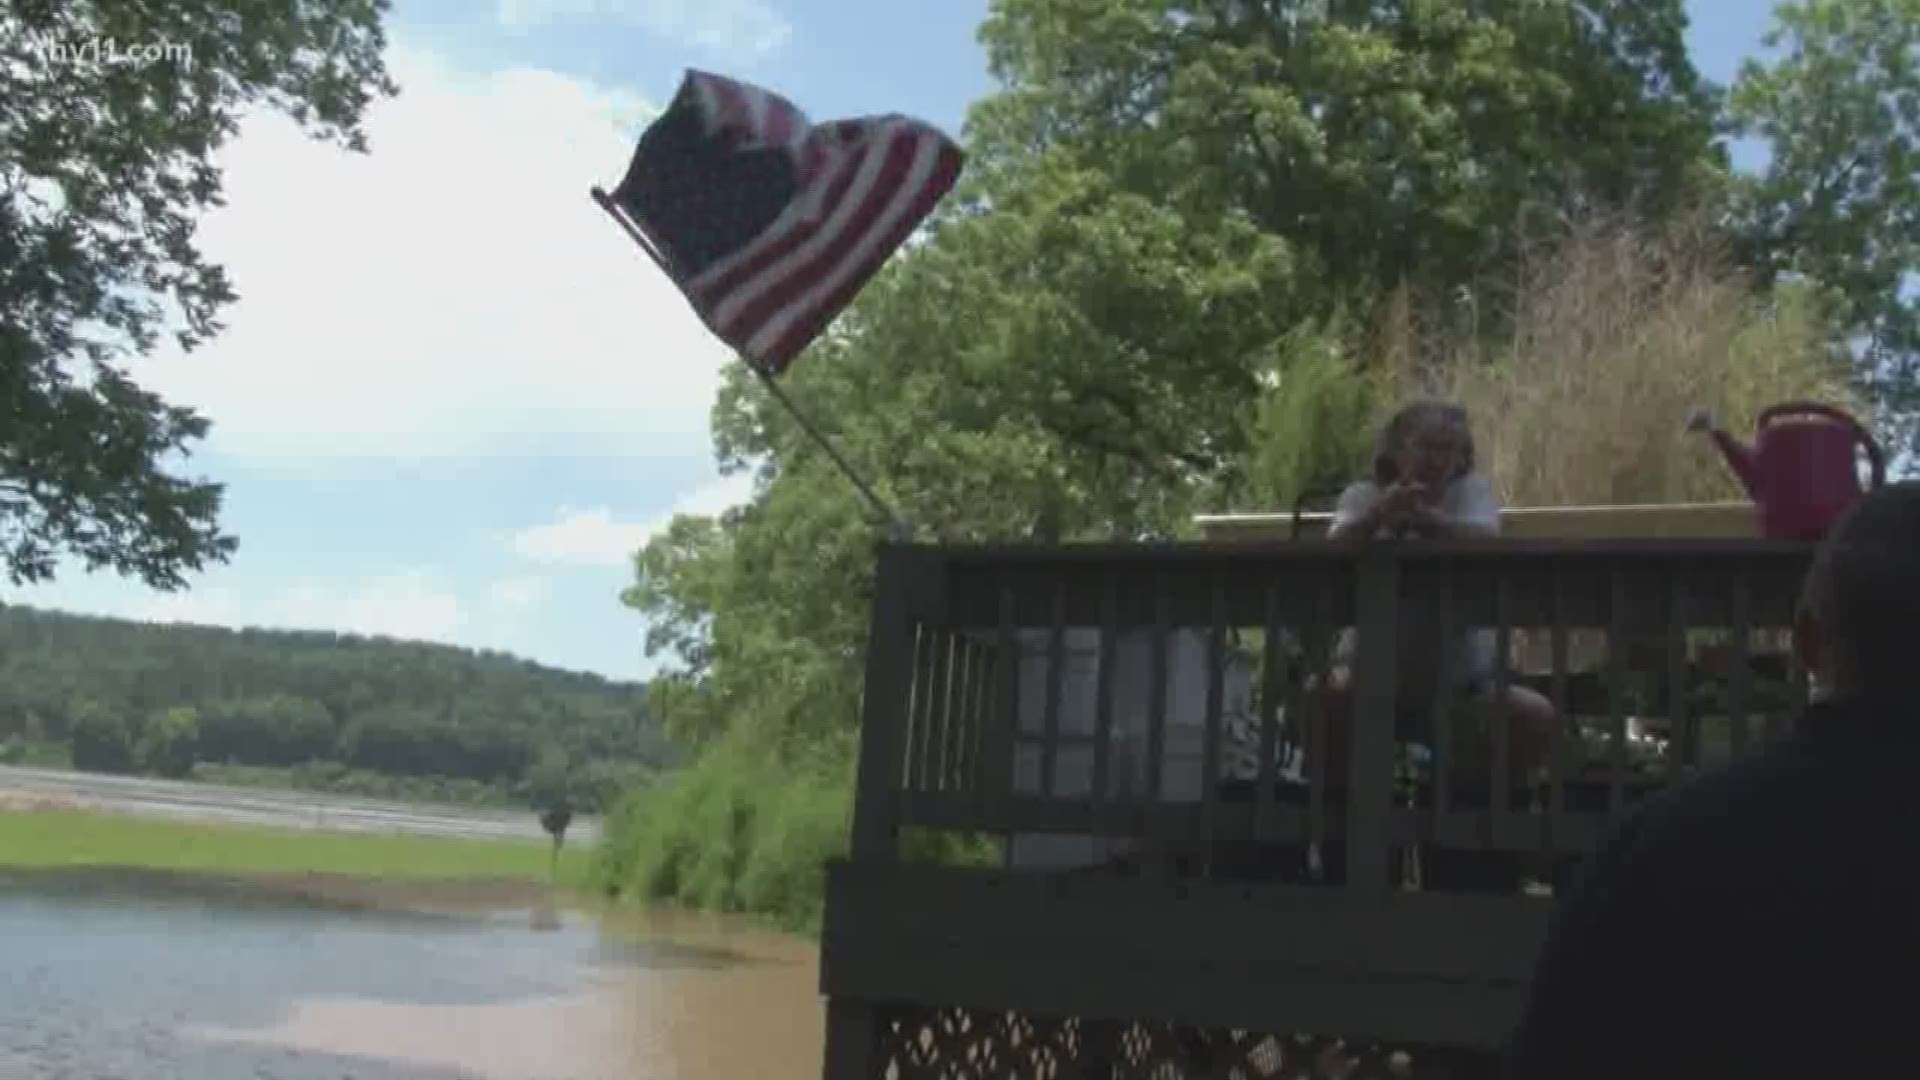 Faulkner County officials have set up checkpoints along the raging Arkansas River, closing off strips of land that are quickly going under water as a historic flood